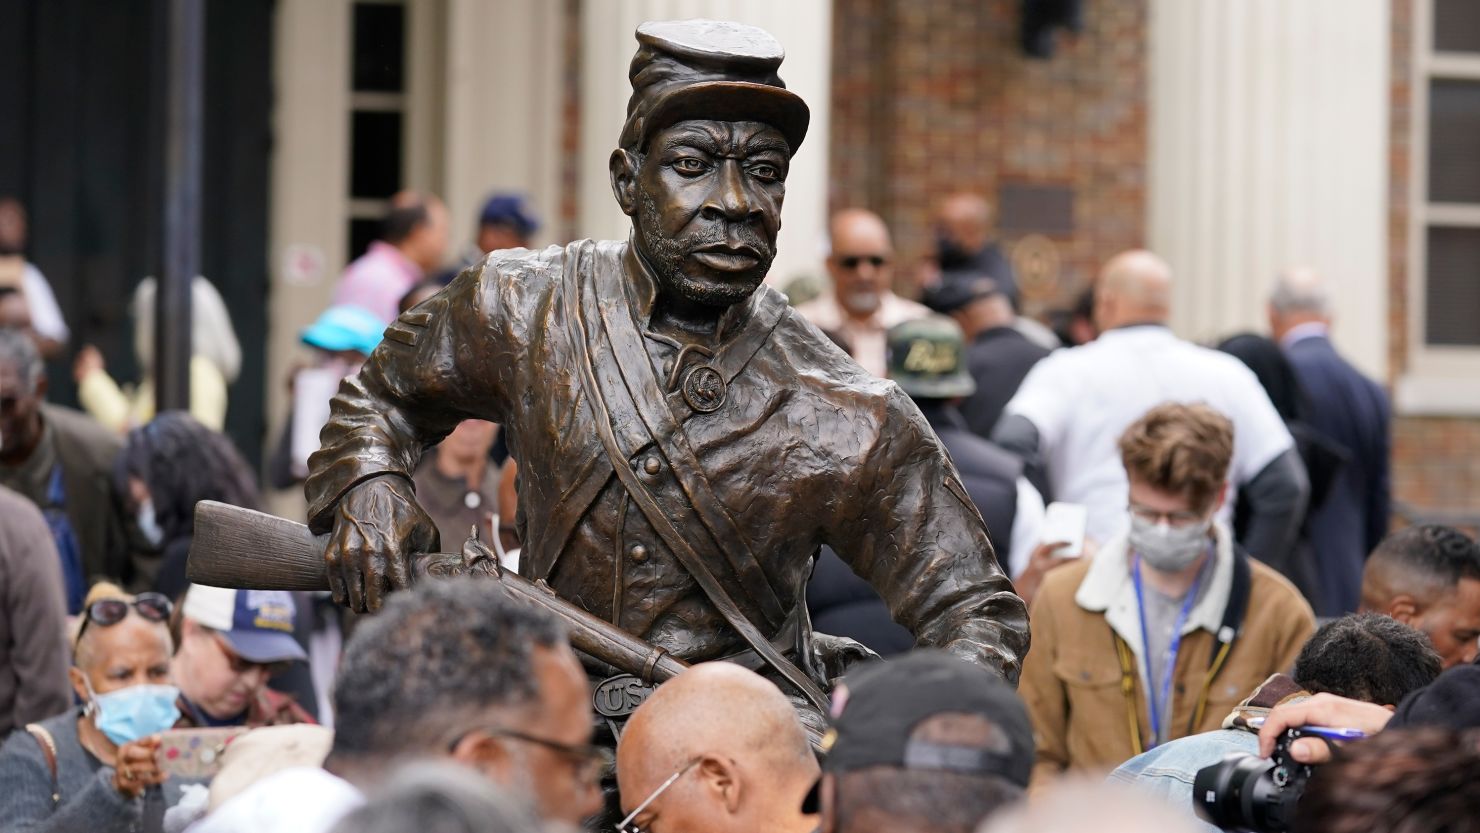 A bronze statue honoring the US Colored Troops who served in the Civil War was unveiled on Saturday in Franklin, Tennessee.